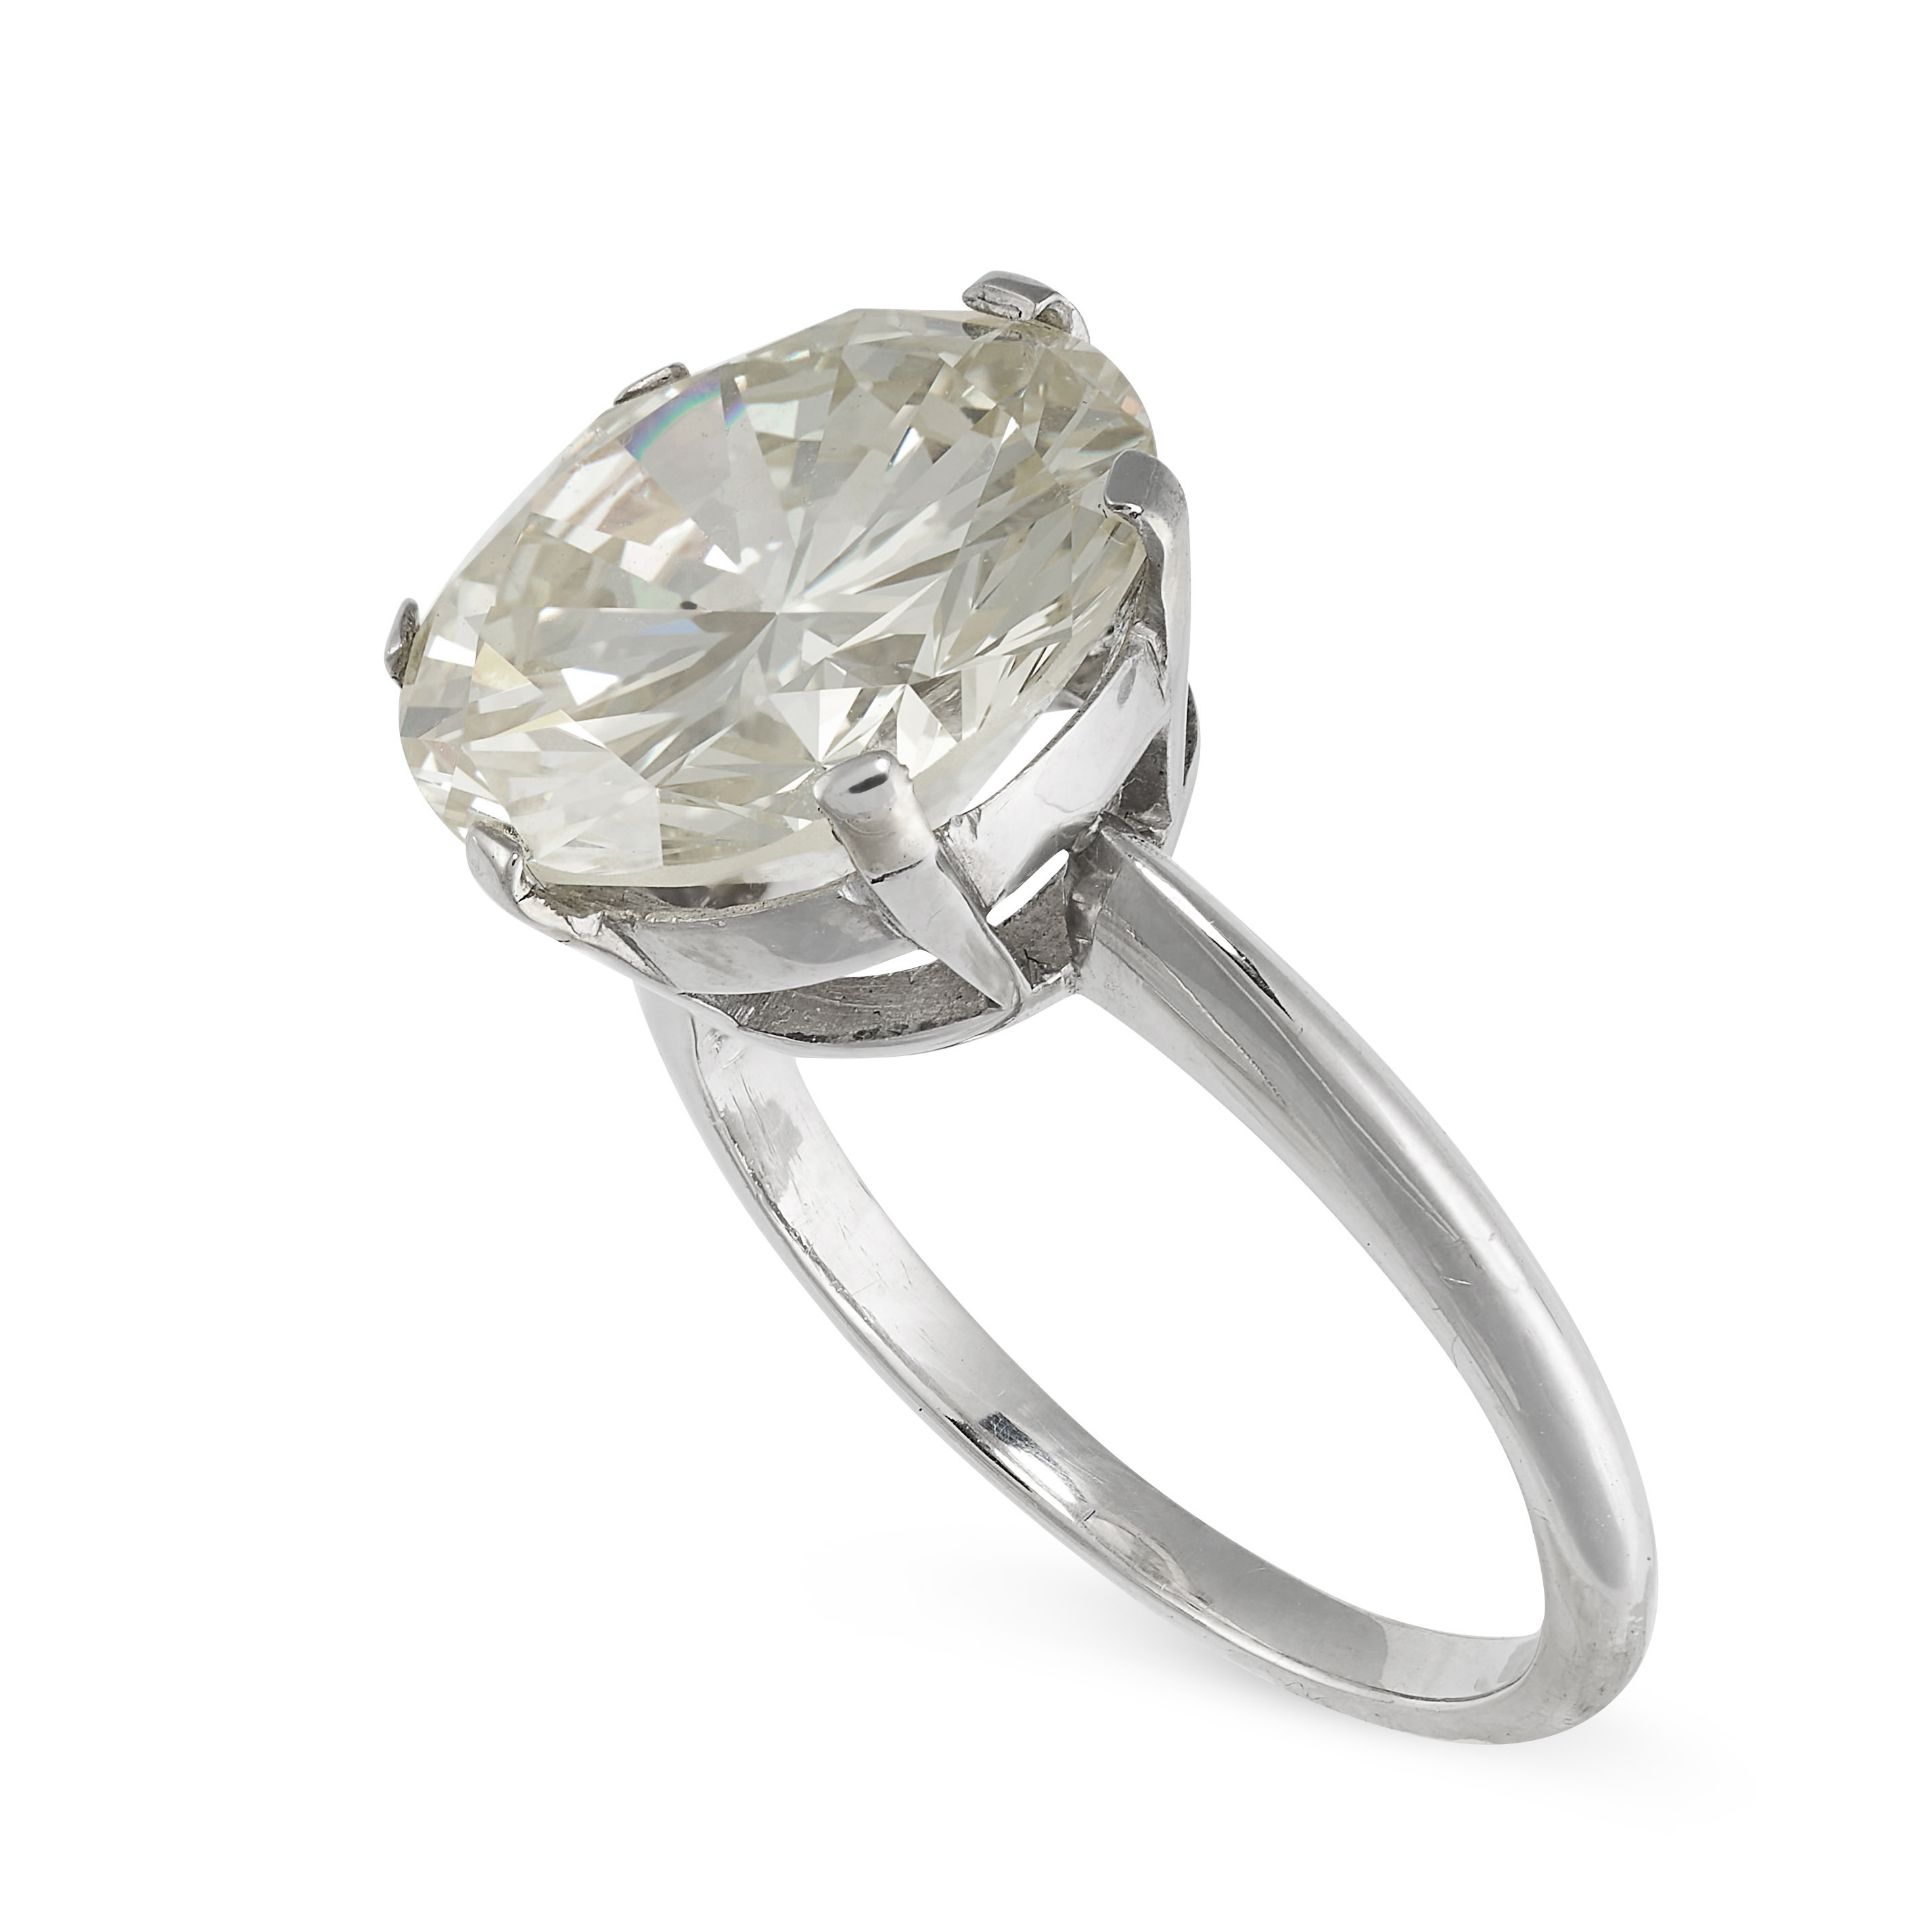 AN IMPRESSIVE 9.02 CARAT SOLITAIRE DIAMOND RING in platinum, set with a round brilliant cut - Image 2 of 2